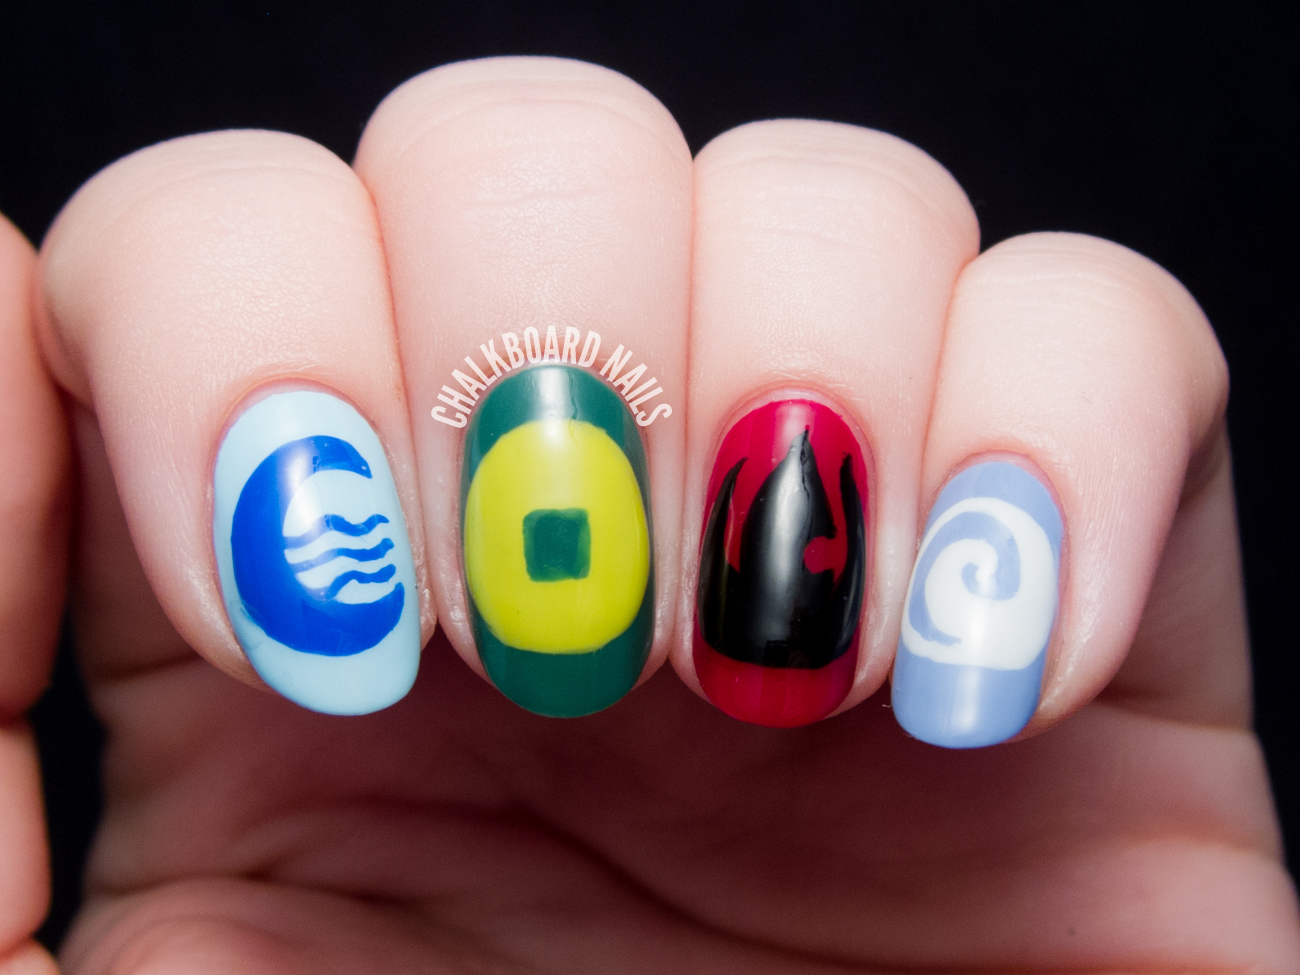 Avatar Nation Flags by @chalkboardnails